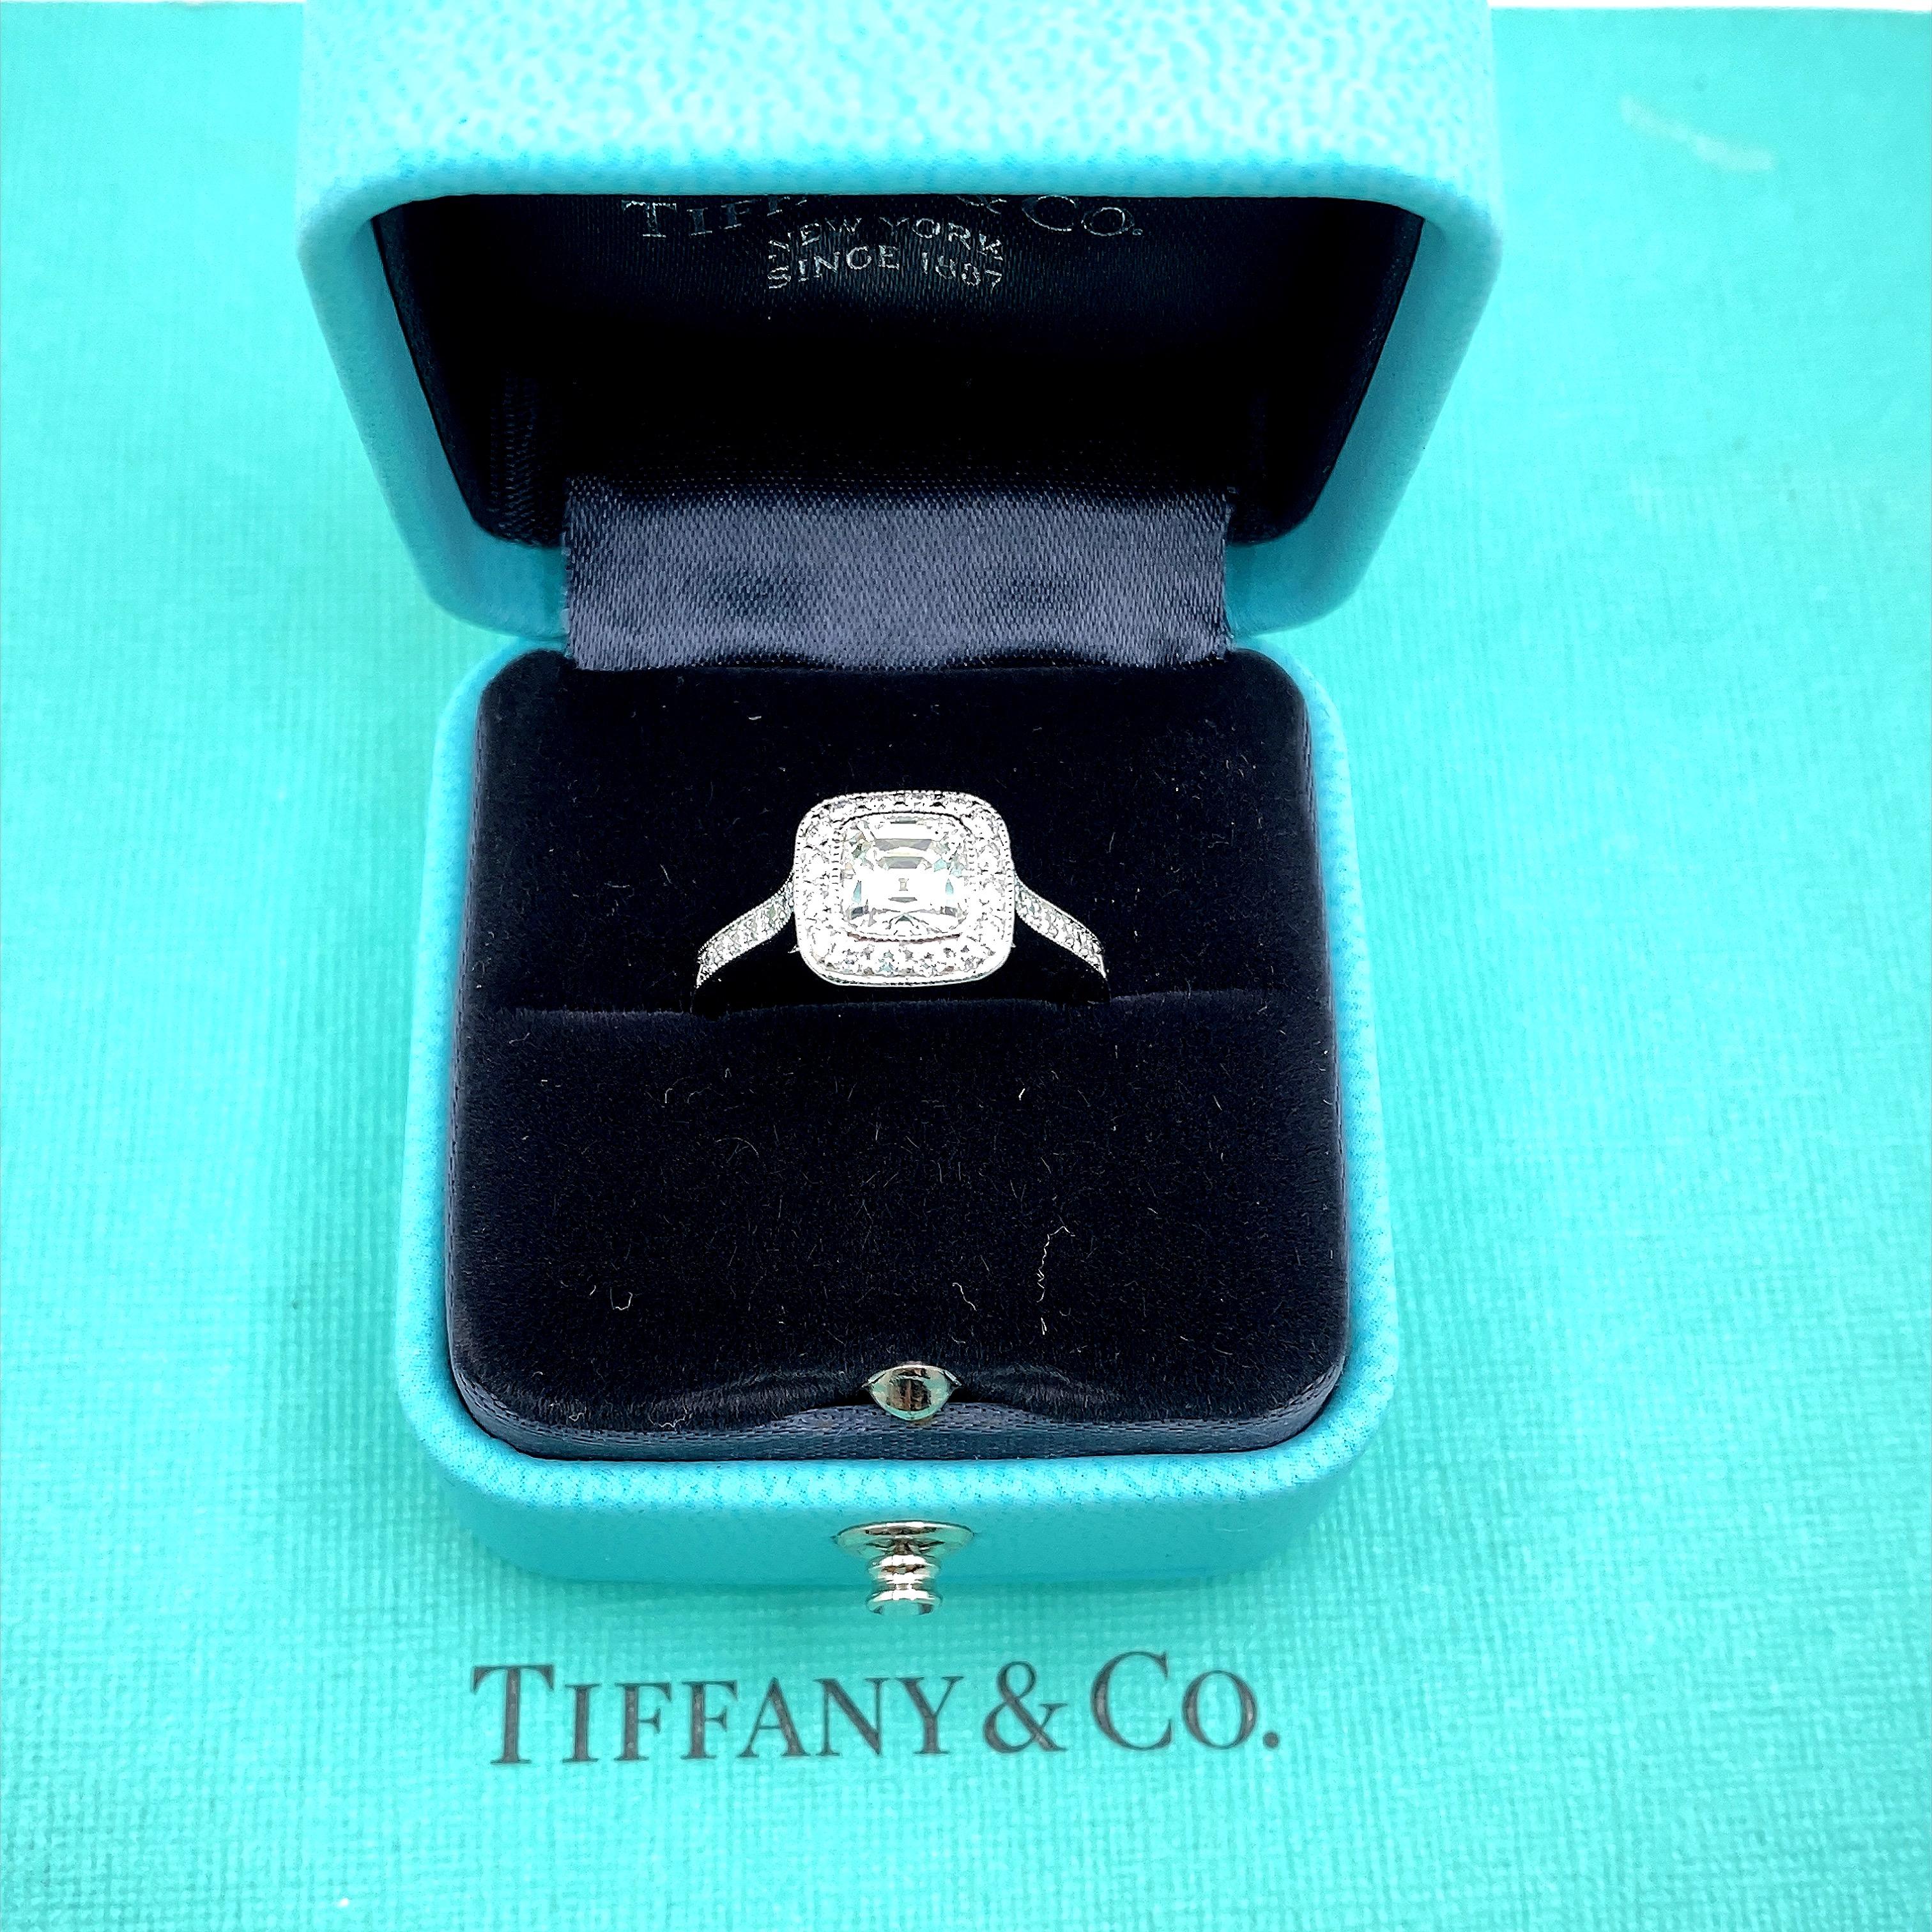 Tiffany & Co. Legacy Cushion Diamond 1.33 Tcw Halo Engagement Ring Platinum In Excellent Condition For Sale In San Diego, CA